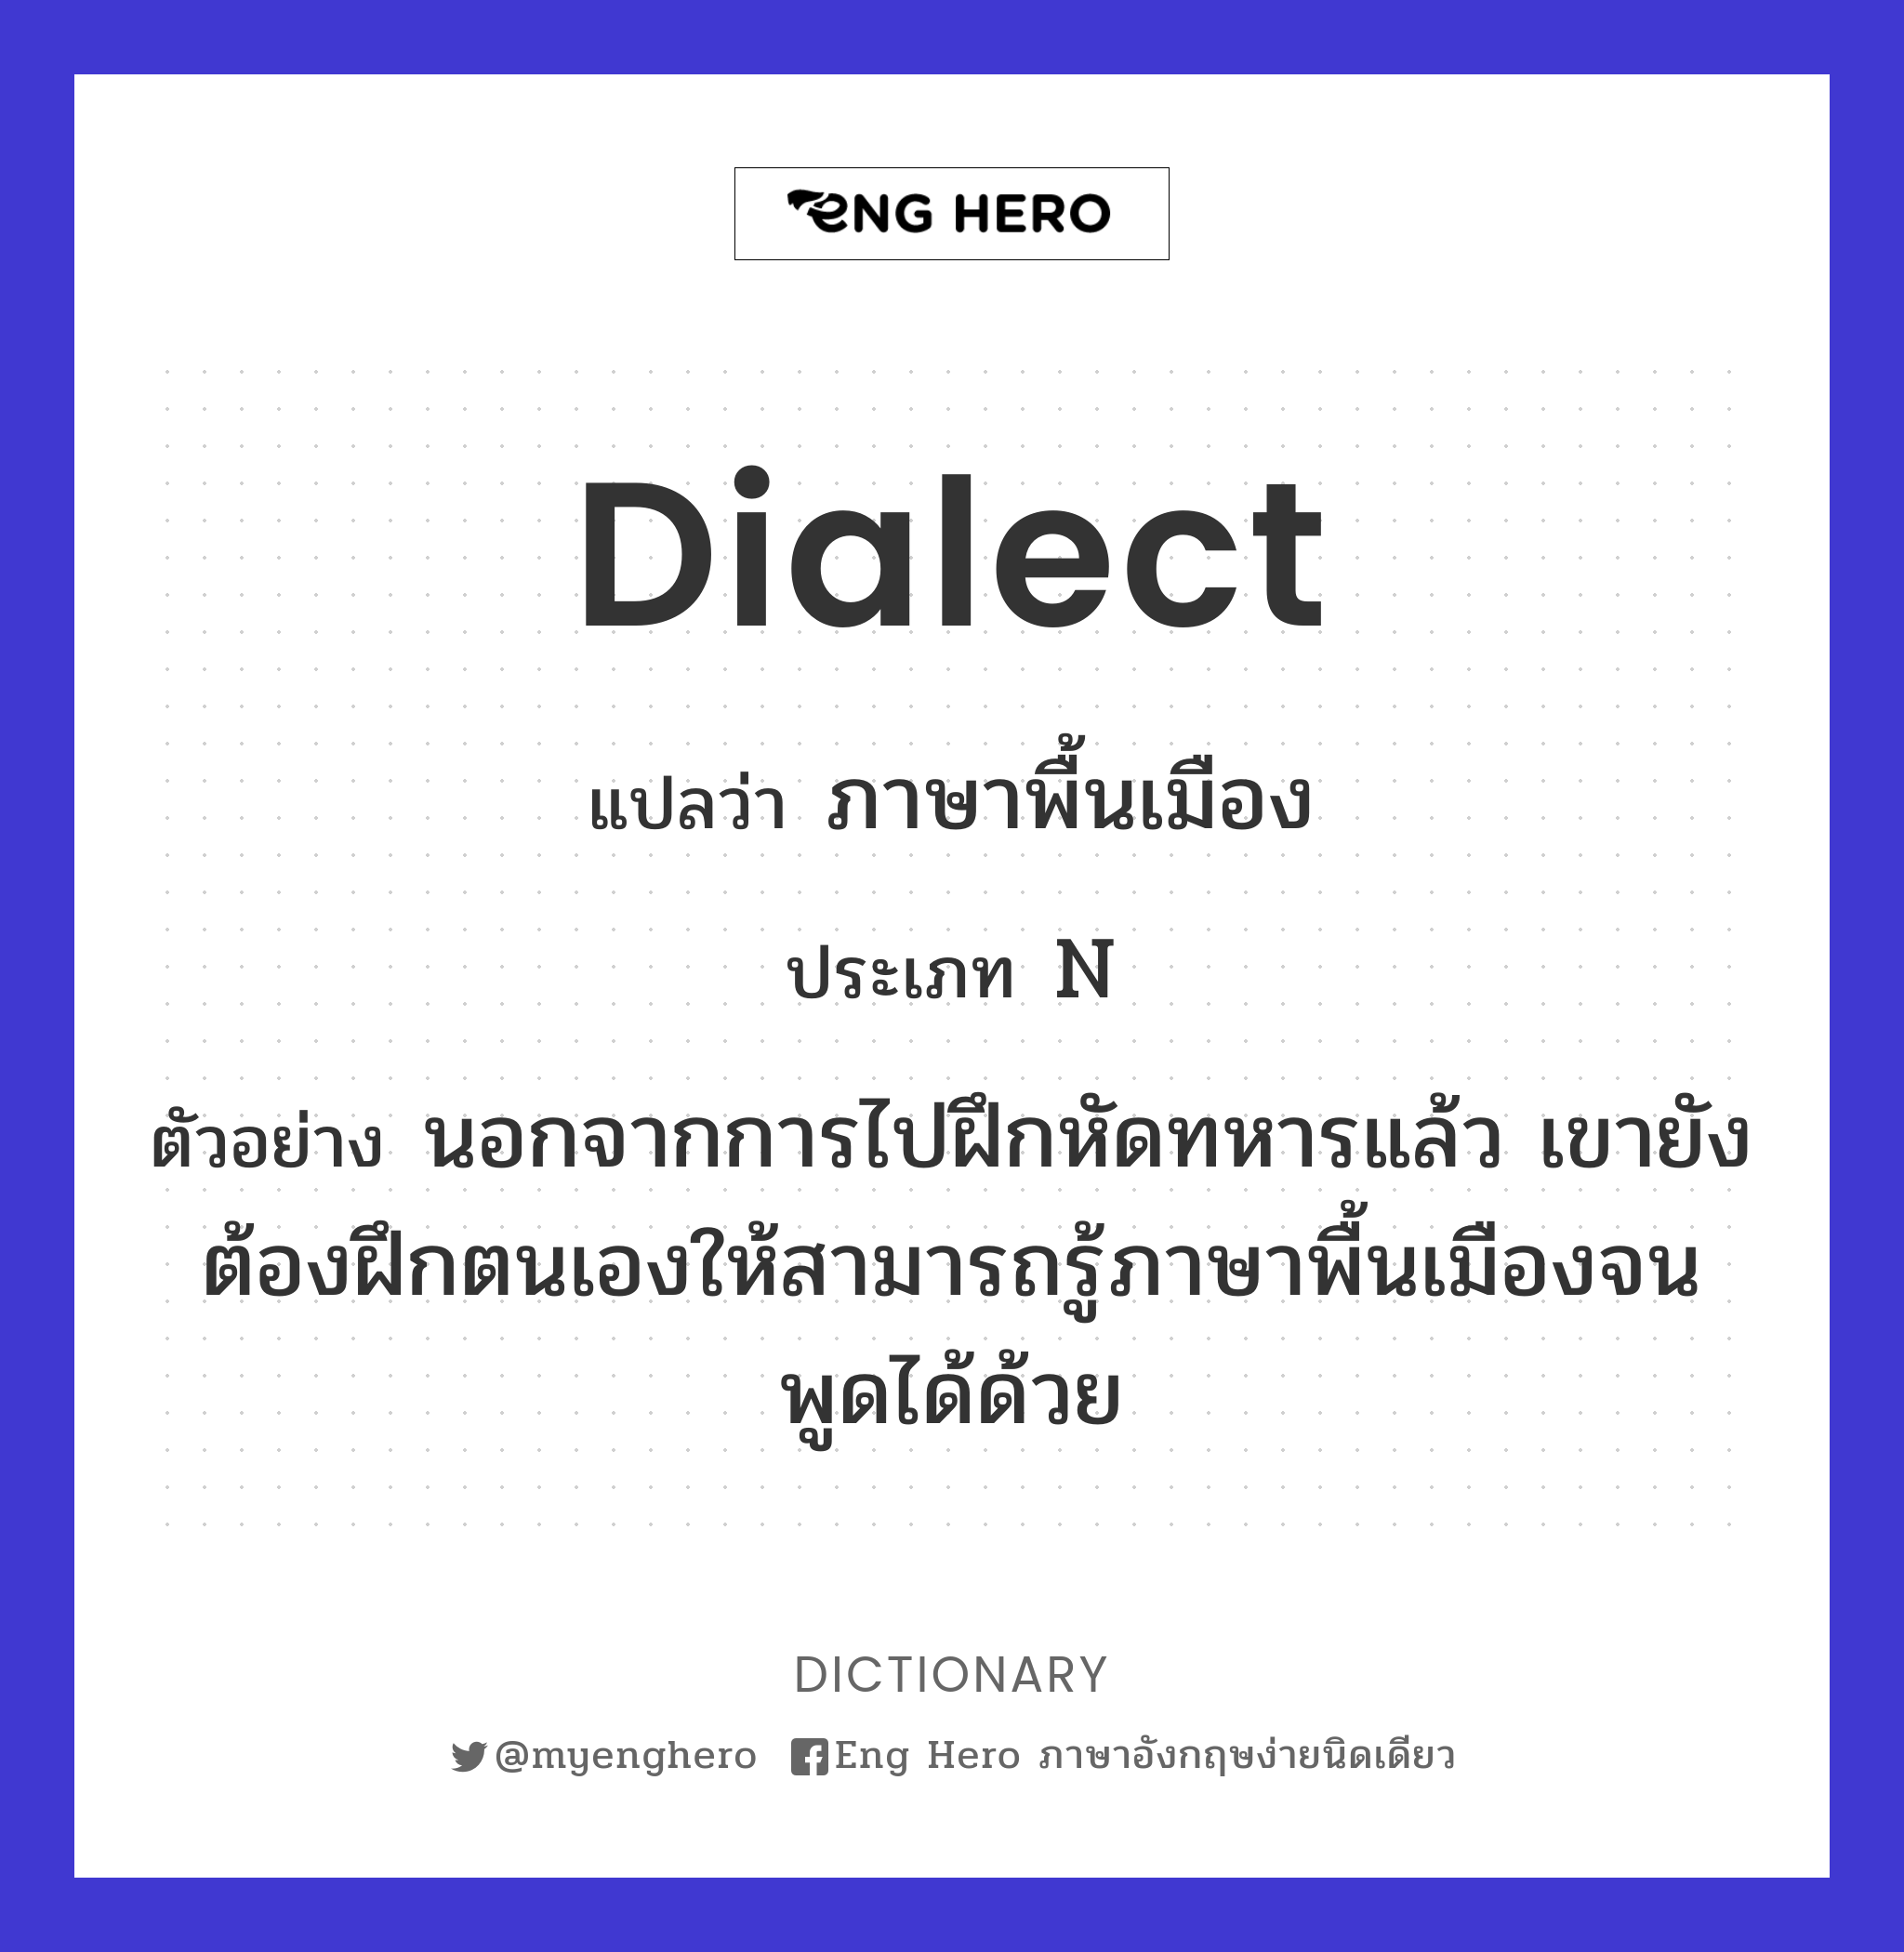 dialect